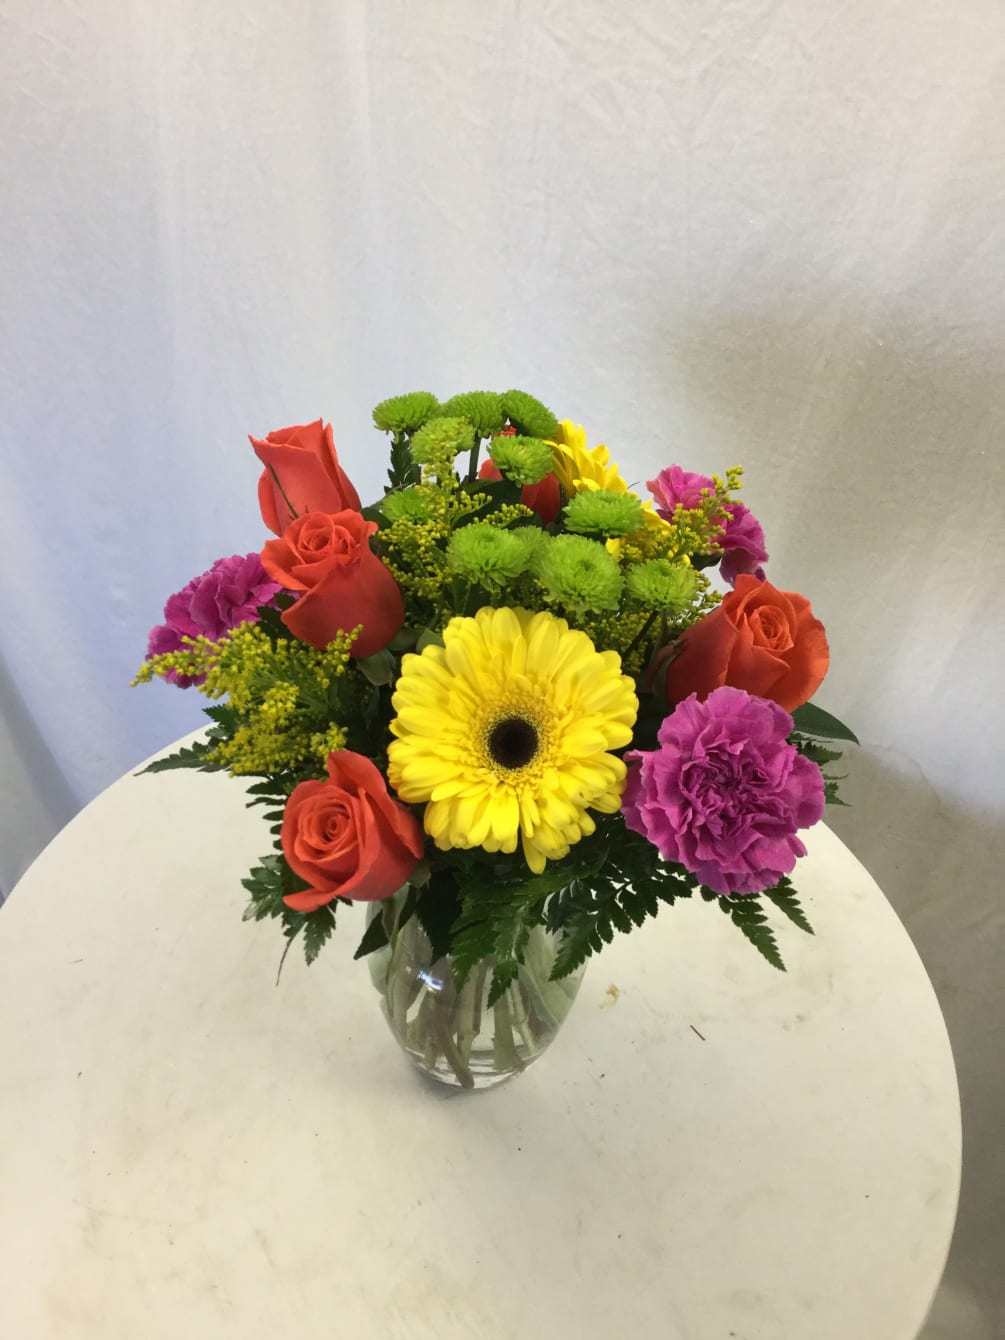 This beautiful bouquet is full of bold color, fresh blooms, and fresh